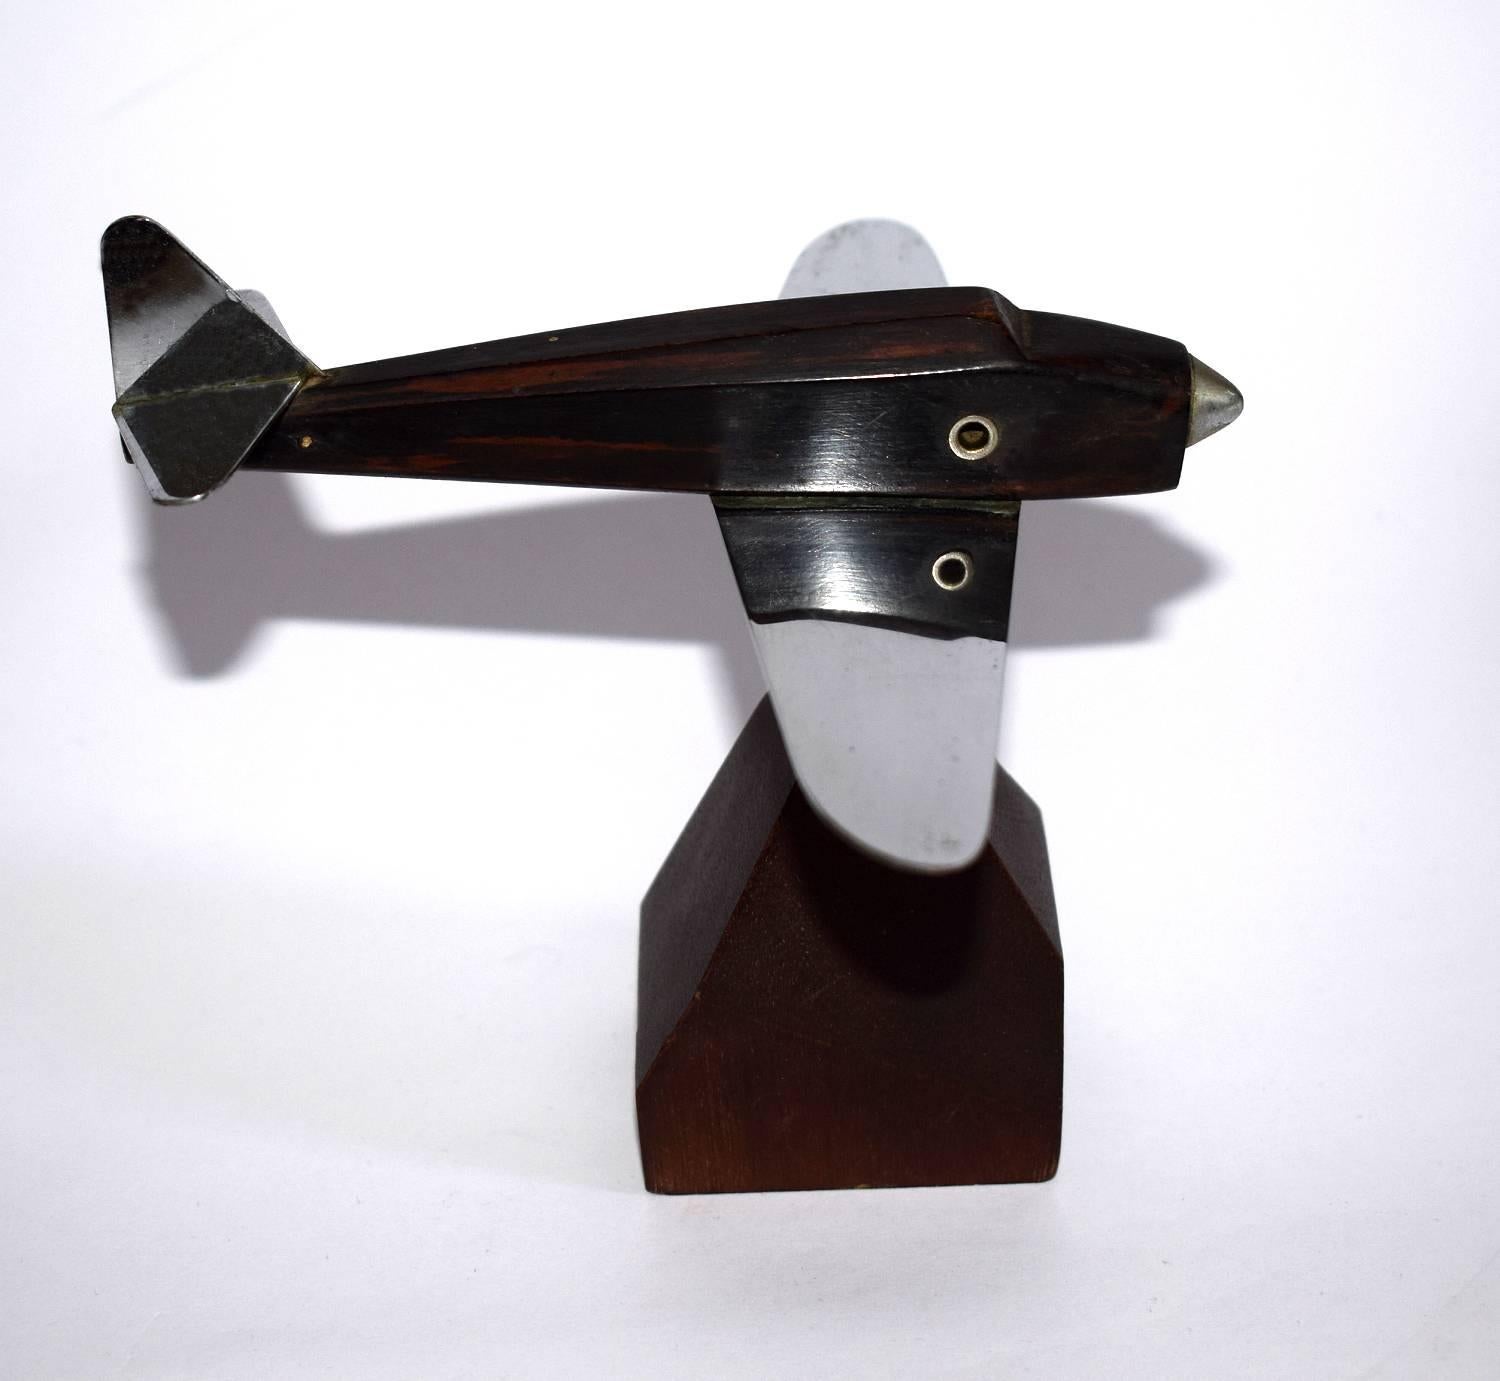 Originating from France is this wonderful Art Deco airplane model and dates to the 1930s. These make ideal paper weights or desk ornaments. This one is in great condition with no damage just minor signs indicating its age.